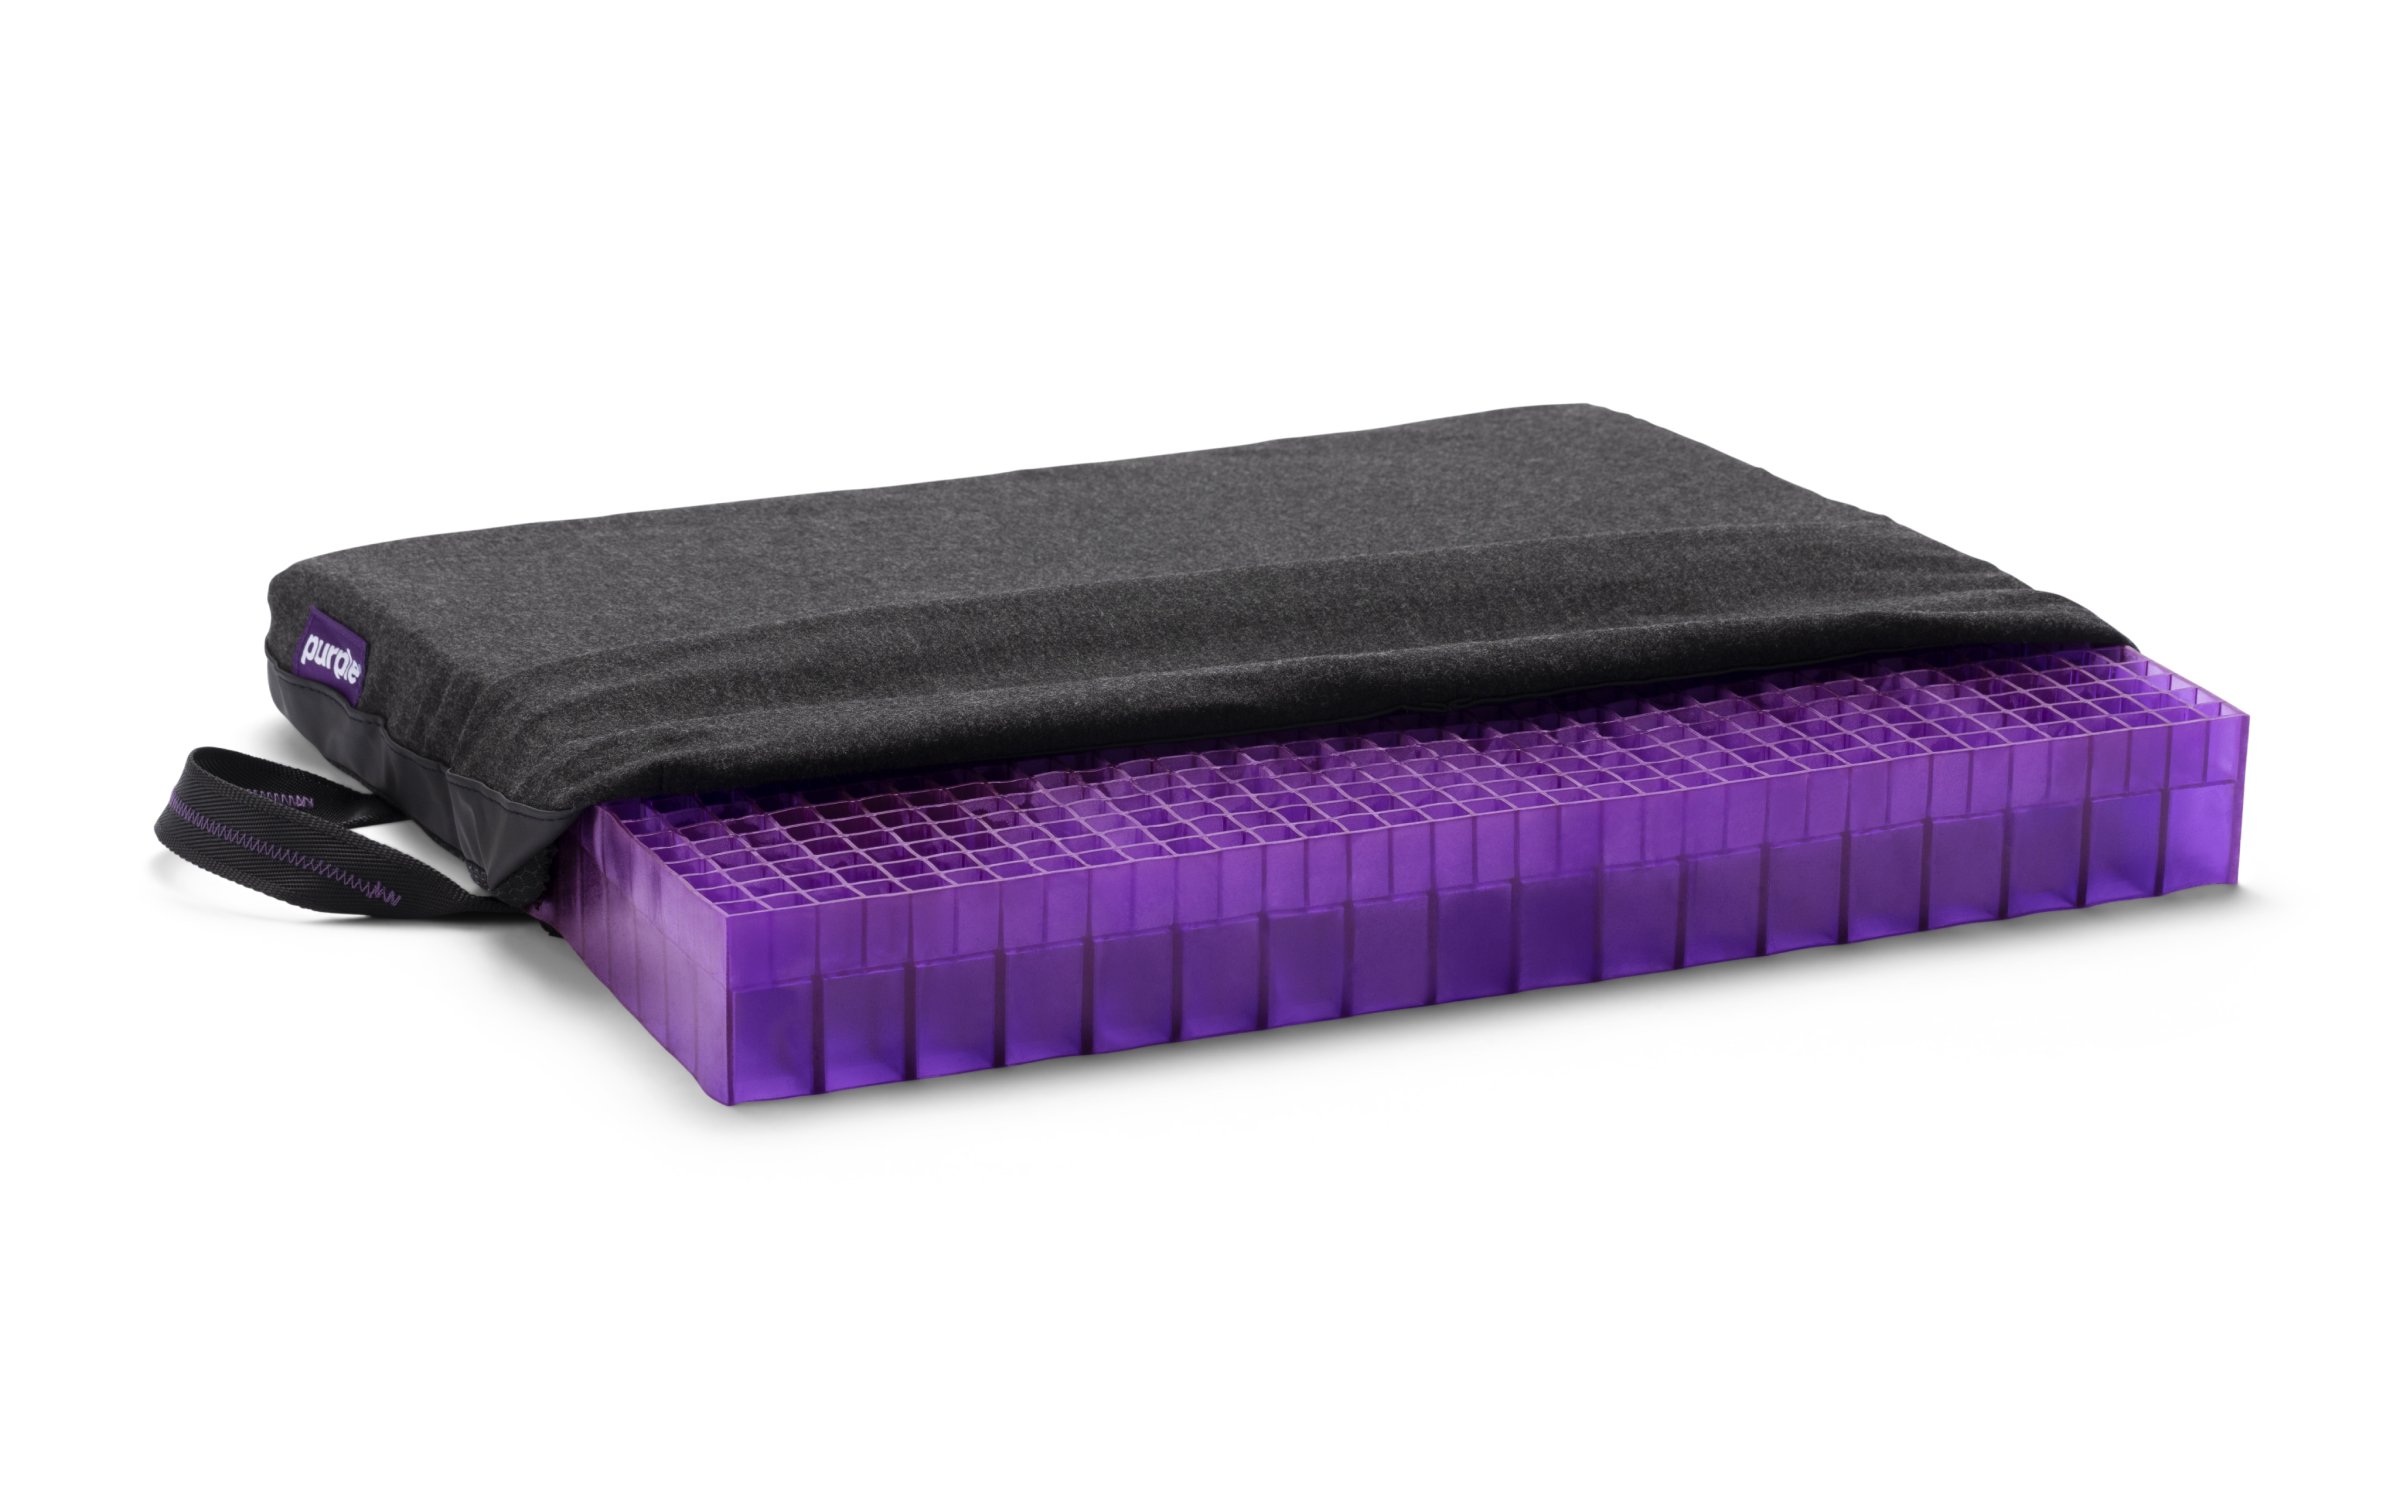 Purple Lower-Back Support Cushion